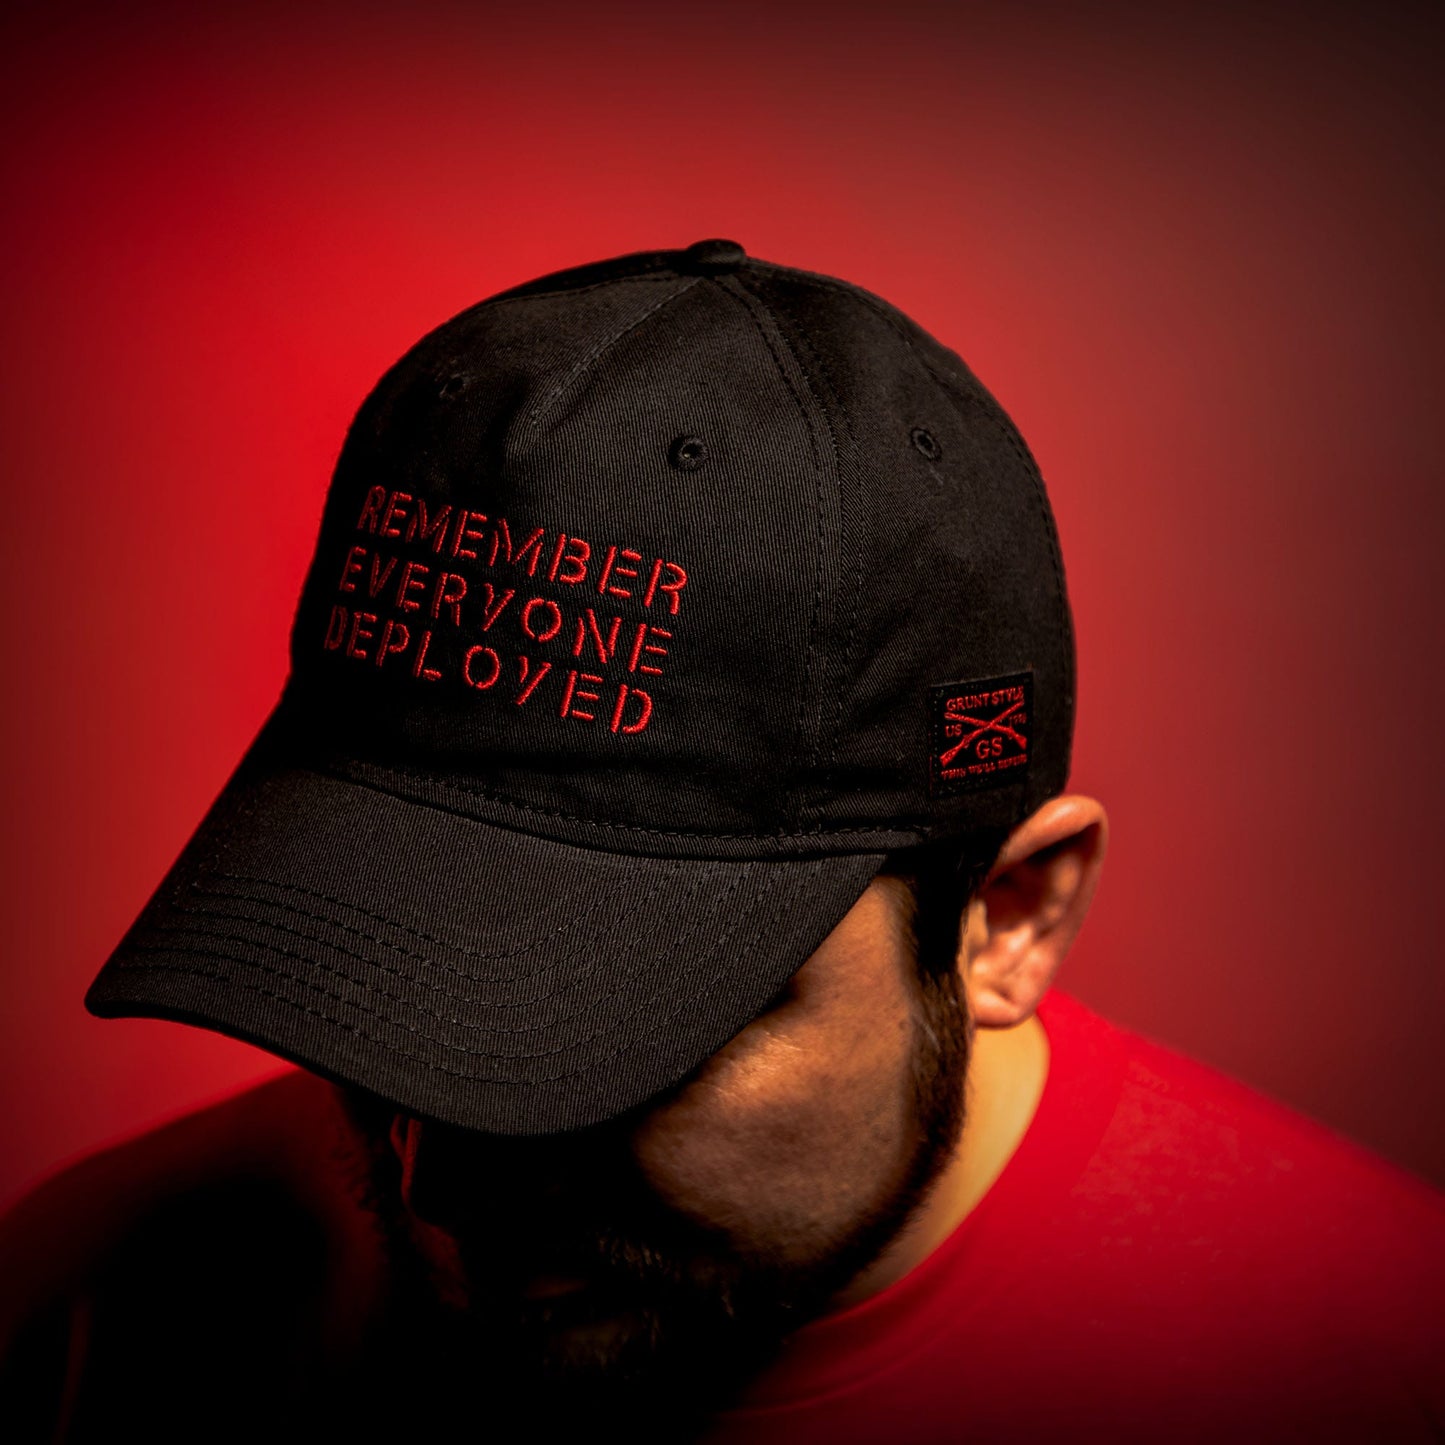 R.E.D. All Forces Hat - Red and Black | Grunt Style 